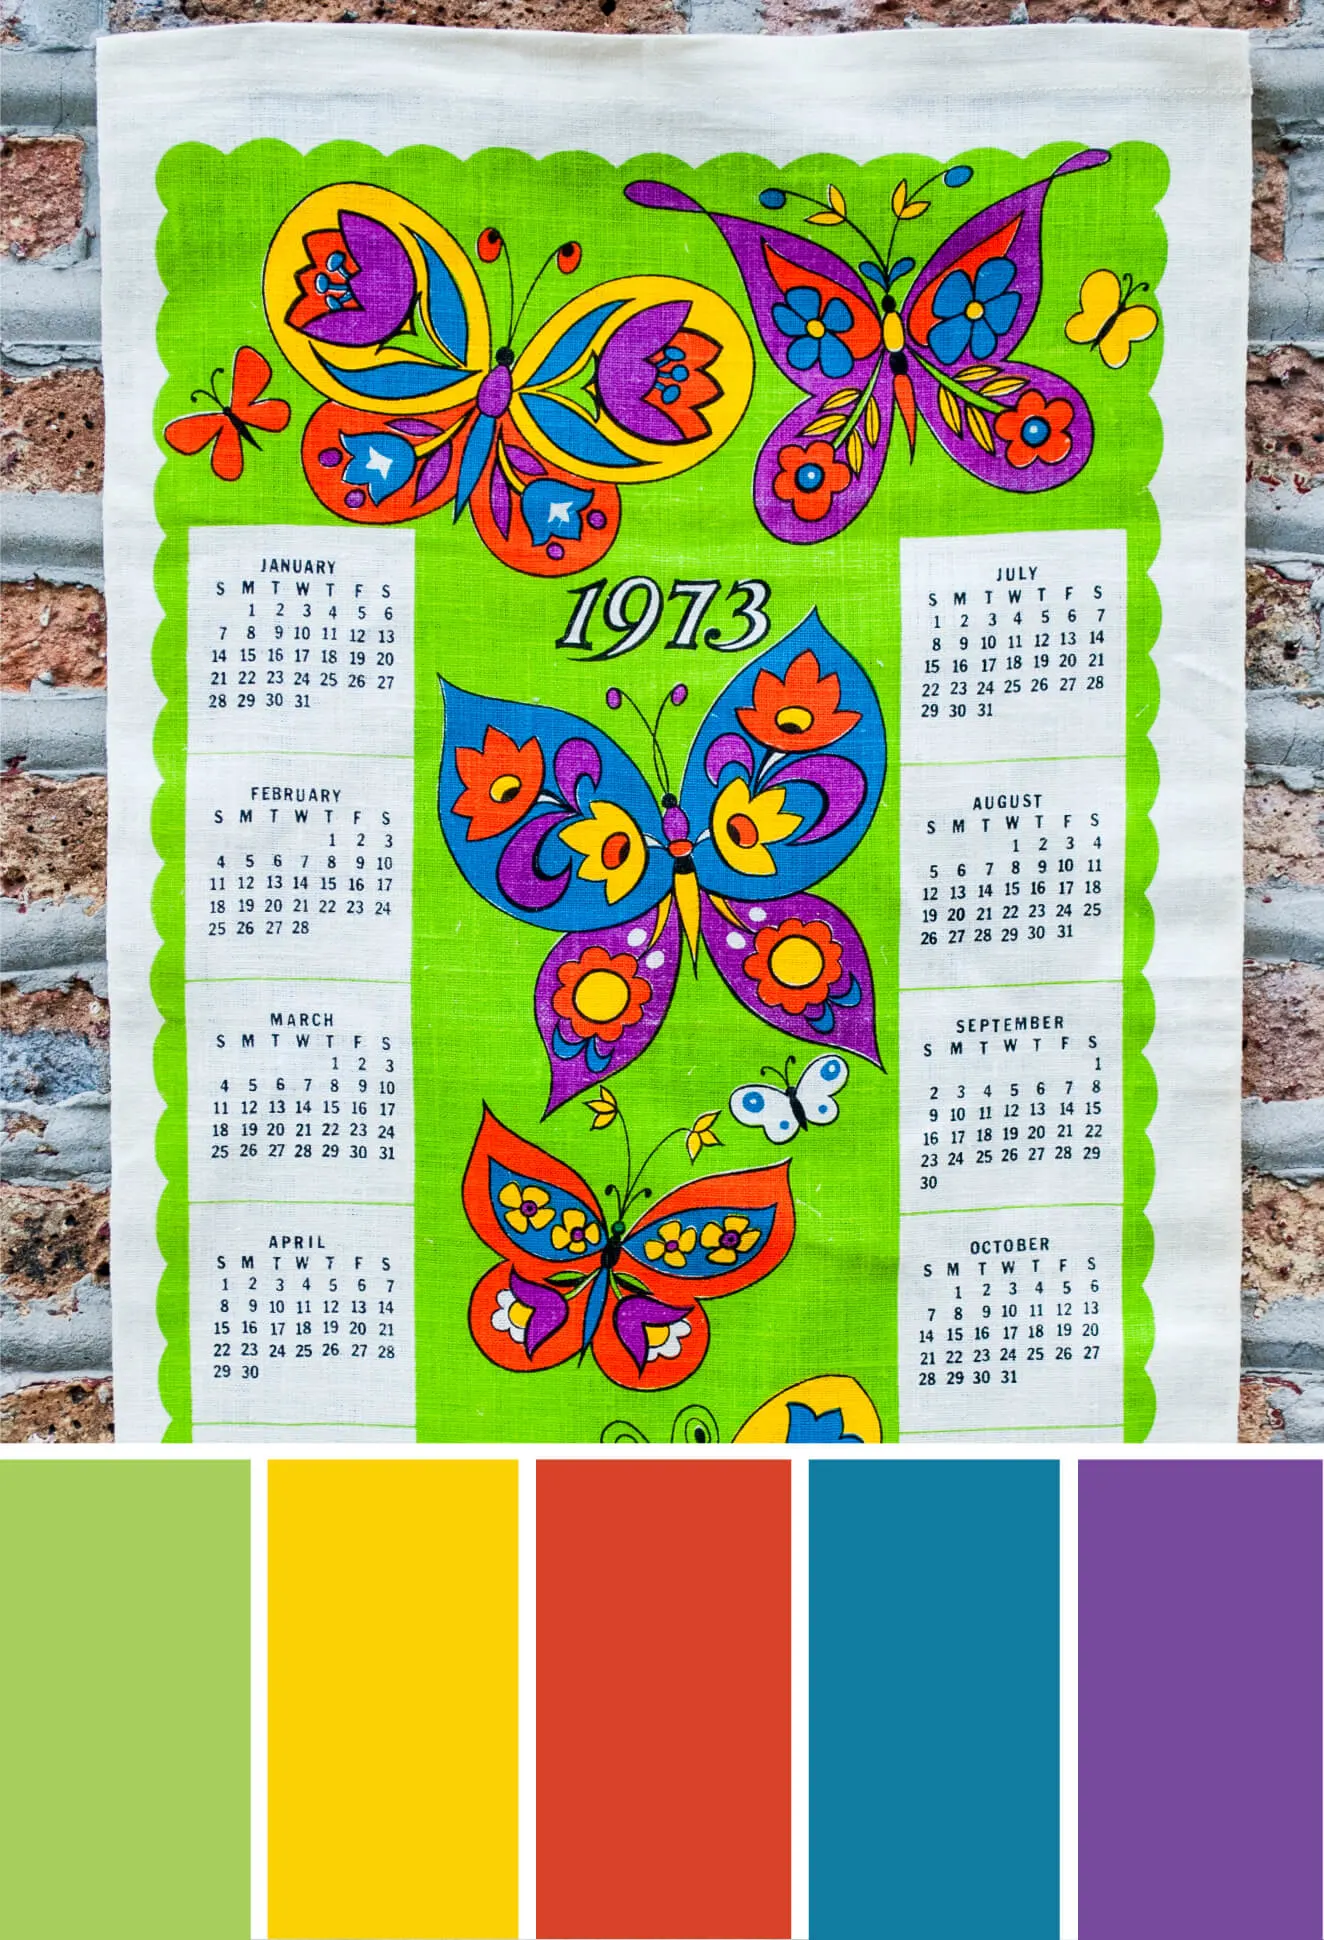 Bright color palette inspired by vintage linen calendars tea towels. Try this bright green, yellow, orange, blue and purple color palette on seasonal wreaths, handmade paper cards, party decorations and more #Colorize #ABColorPalette #ad #colorpalette #colors